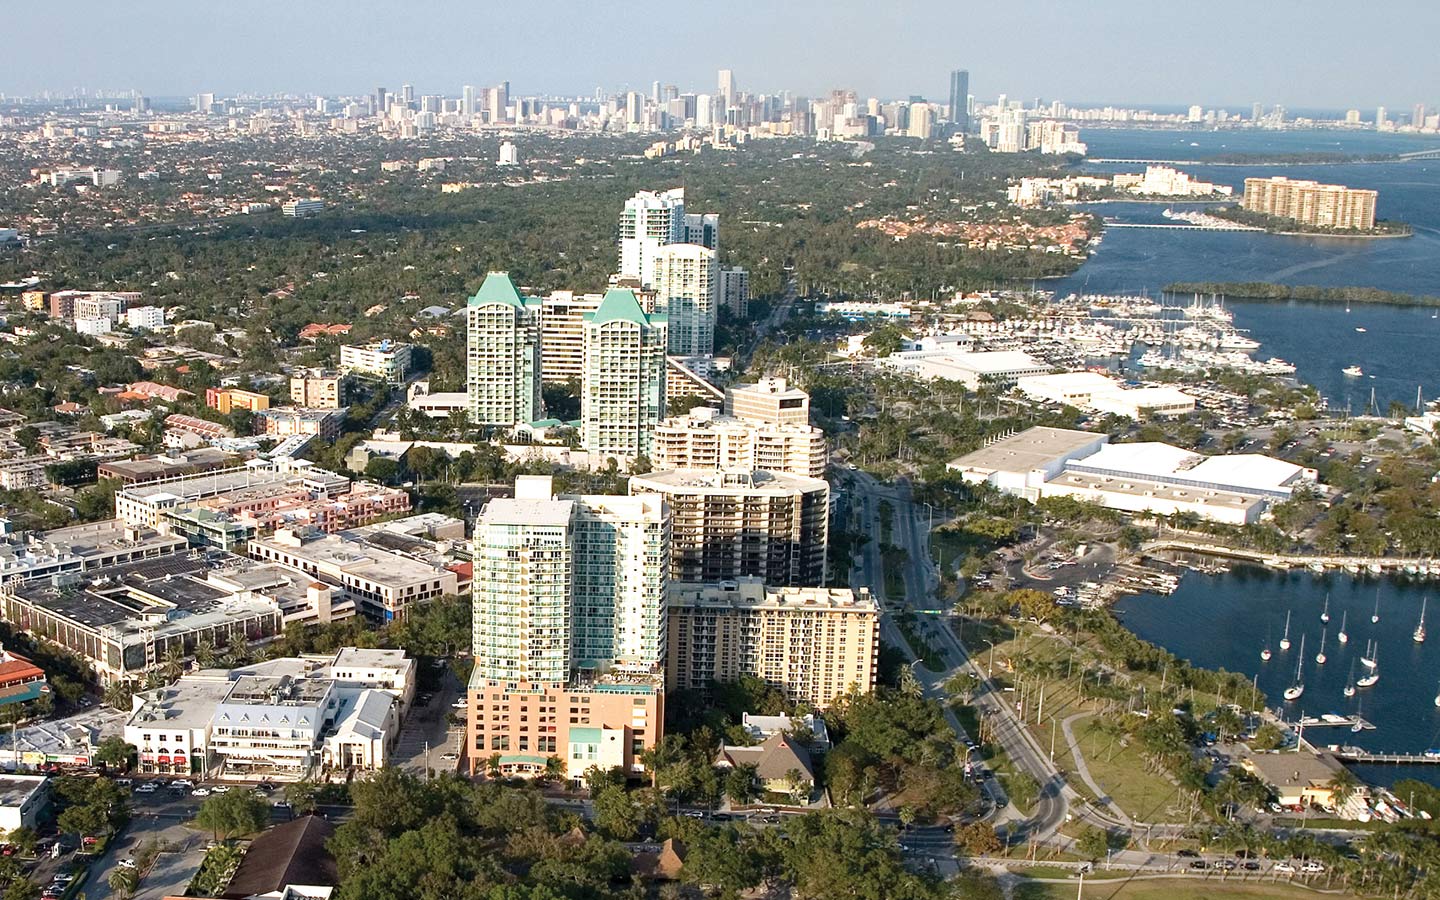 Aerial view of Coconut Grove and marina